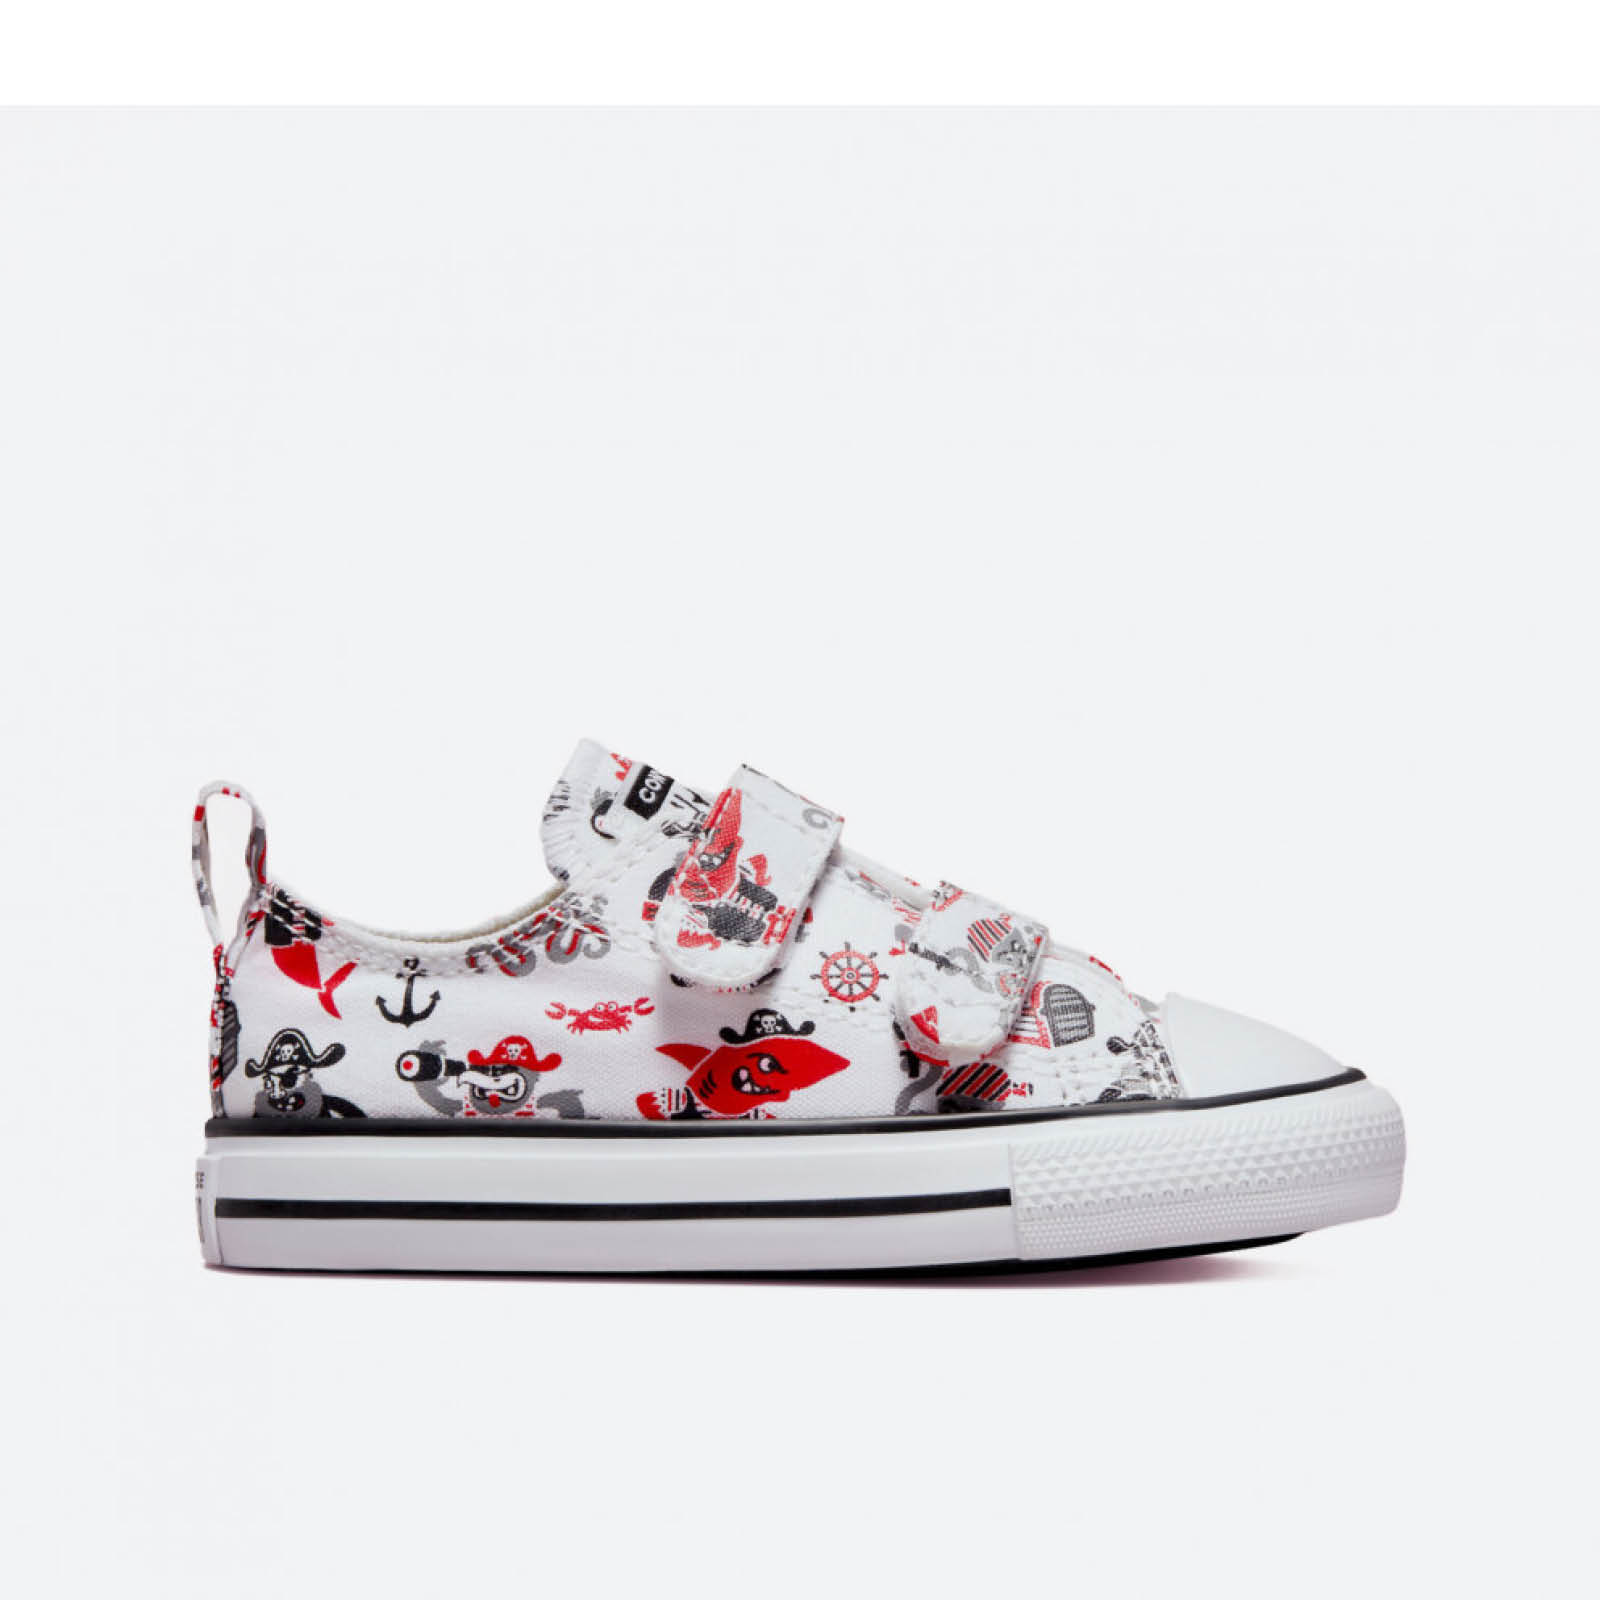 Converse - CHUCK TAYLOR ALL STAR 2V PIRATES - 102-WHITE/UNIVERSITY RED/BLACK Παιδικά > Παπούτσια > Sneaker > Παπούτσι Low Cut